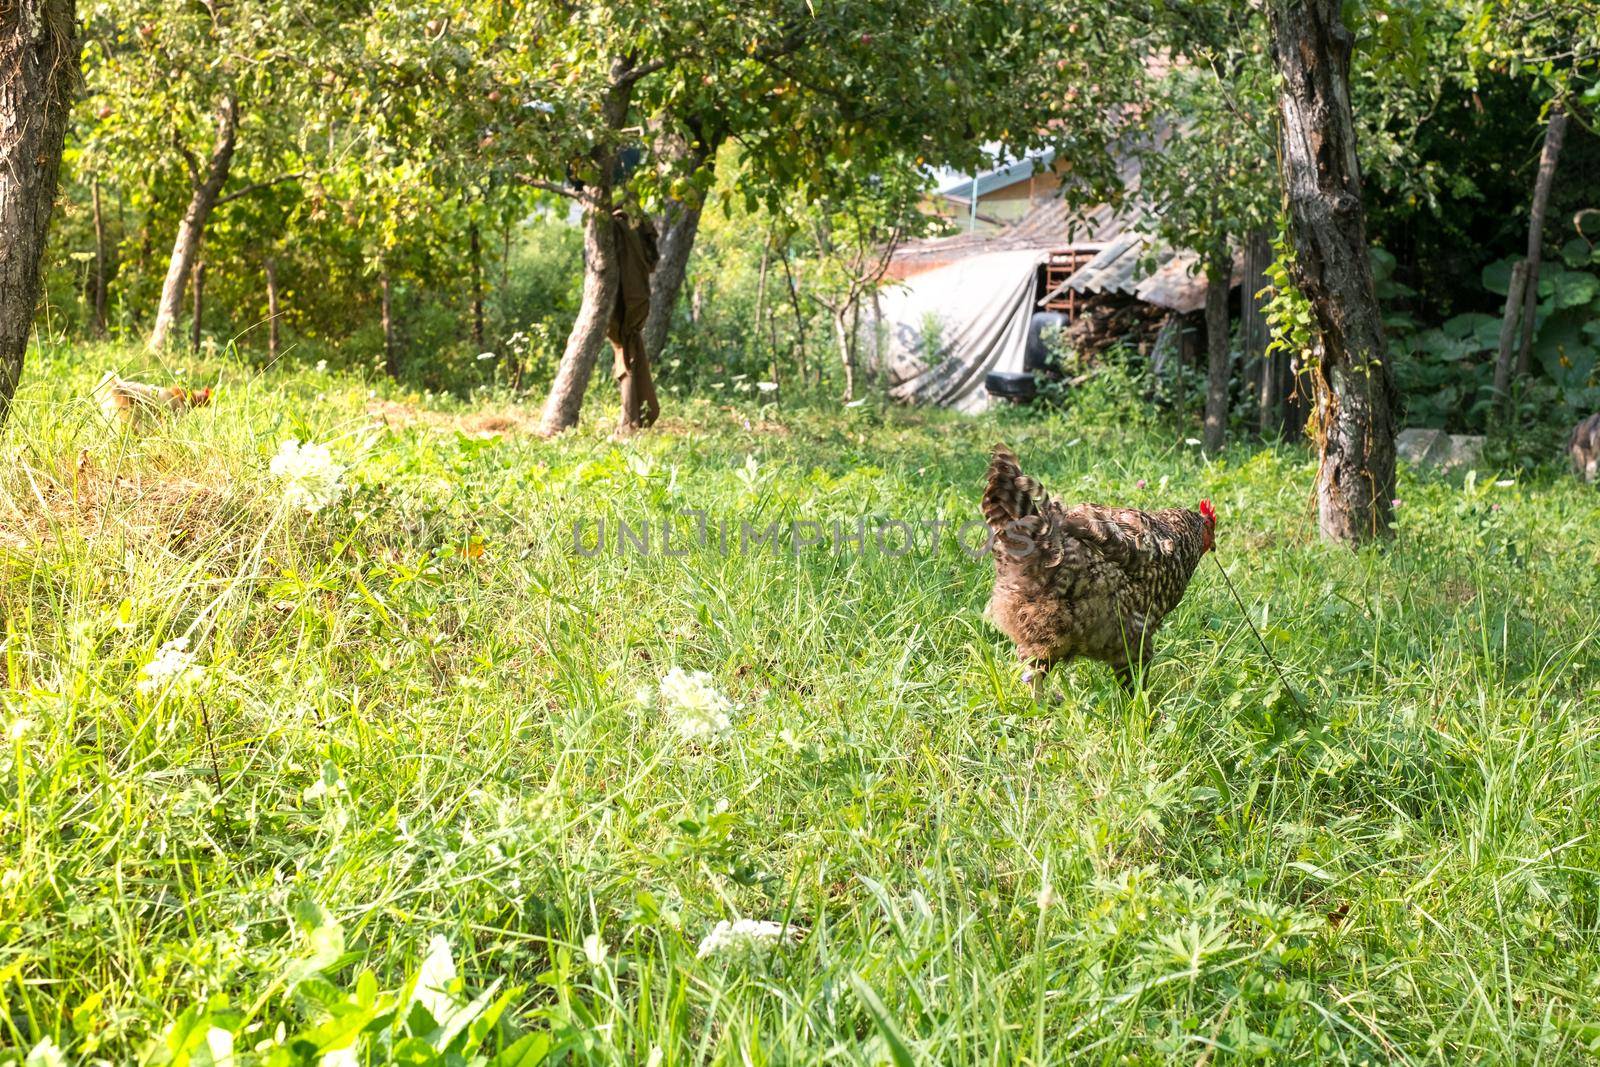 chickens in the country yard by Roberto